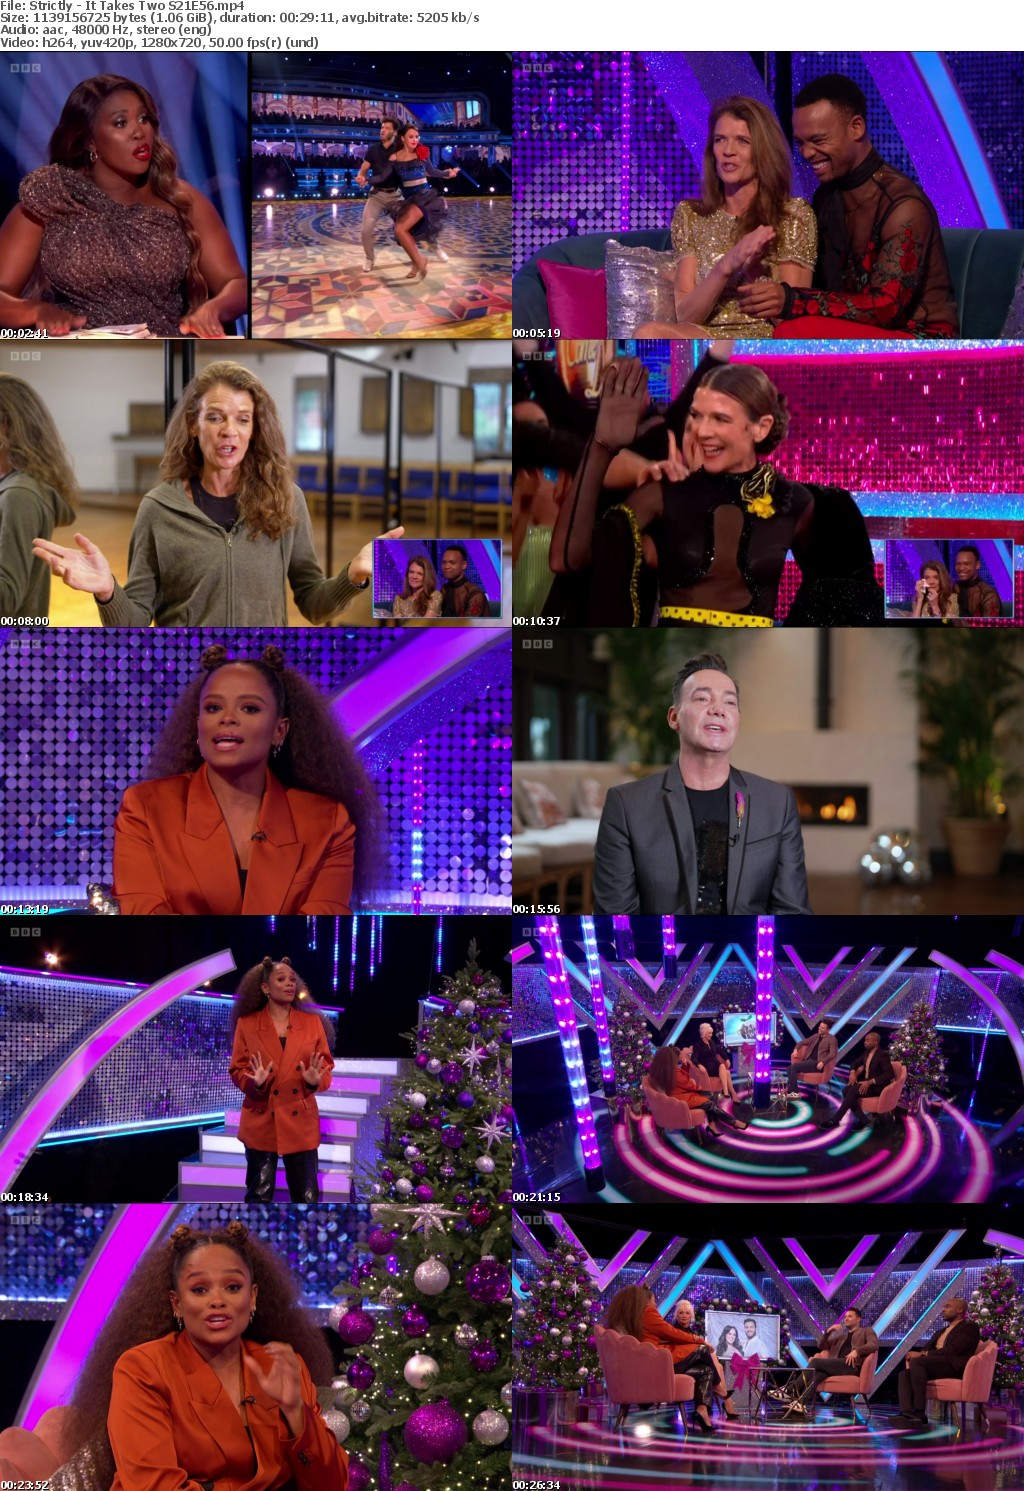 Strictly - It Takes Two S21E56 (1280x720p HD, 50fps, soft Eng subs)